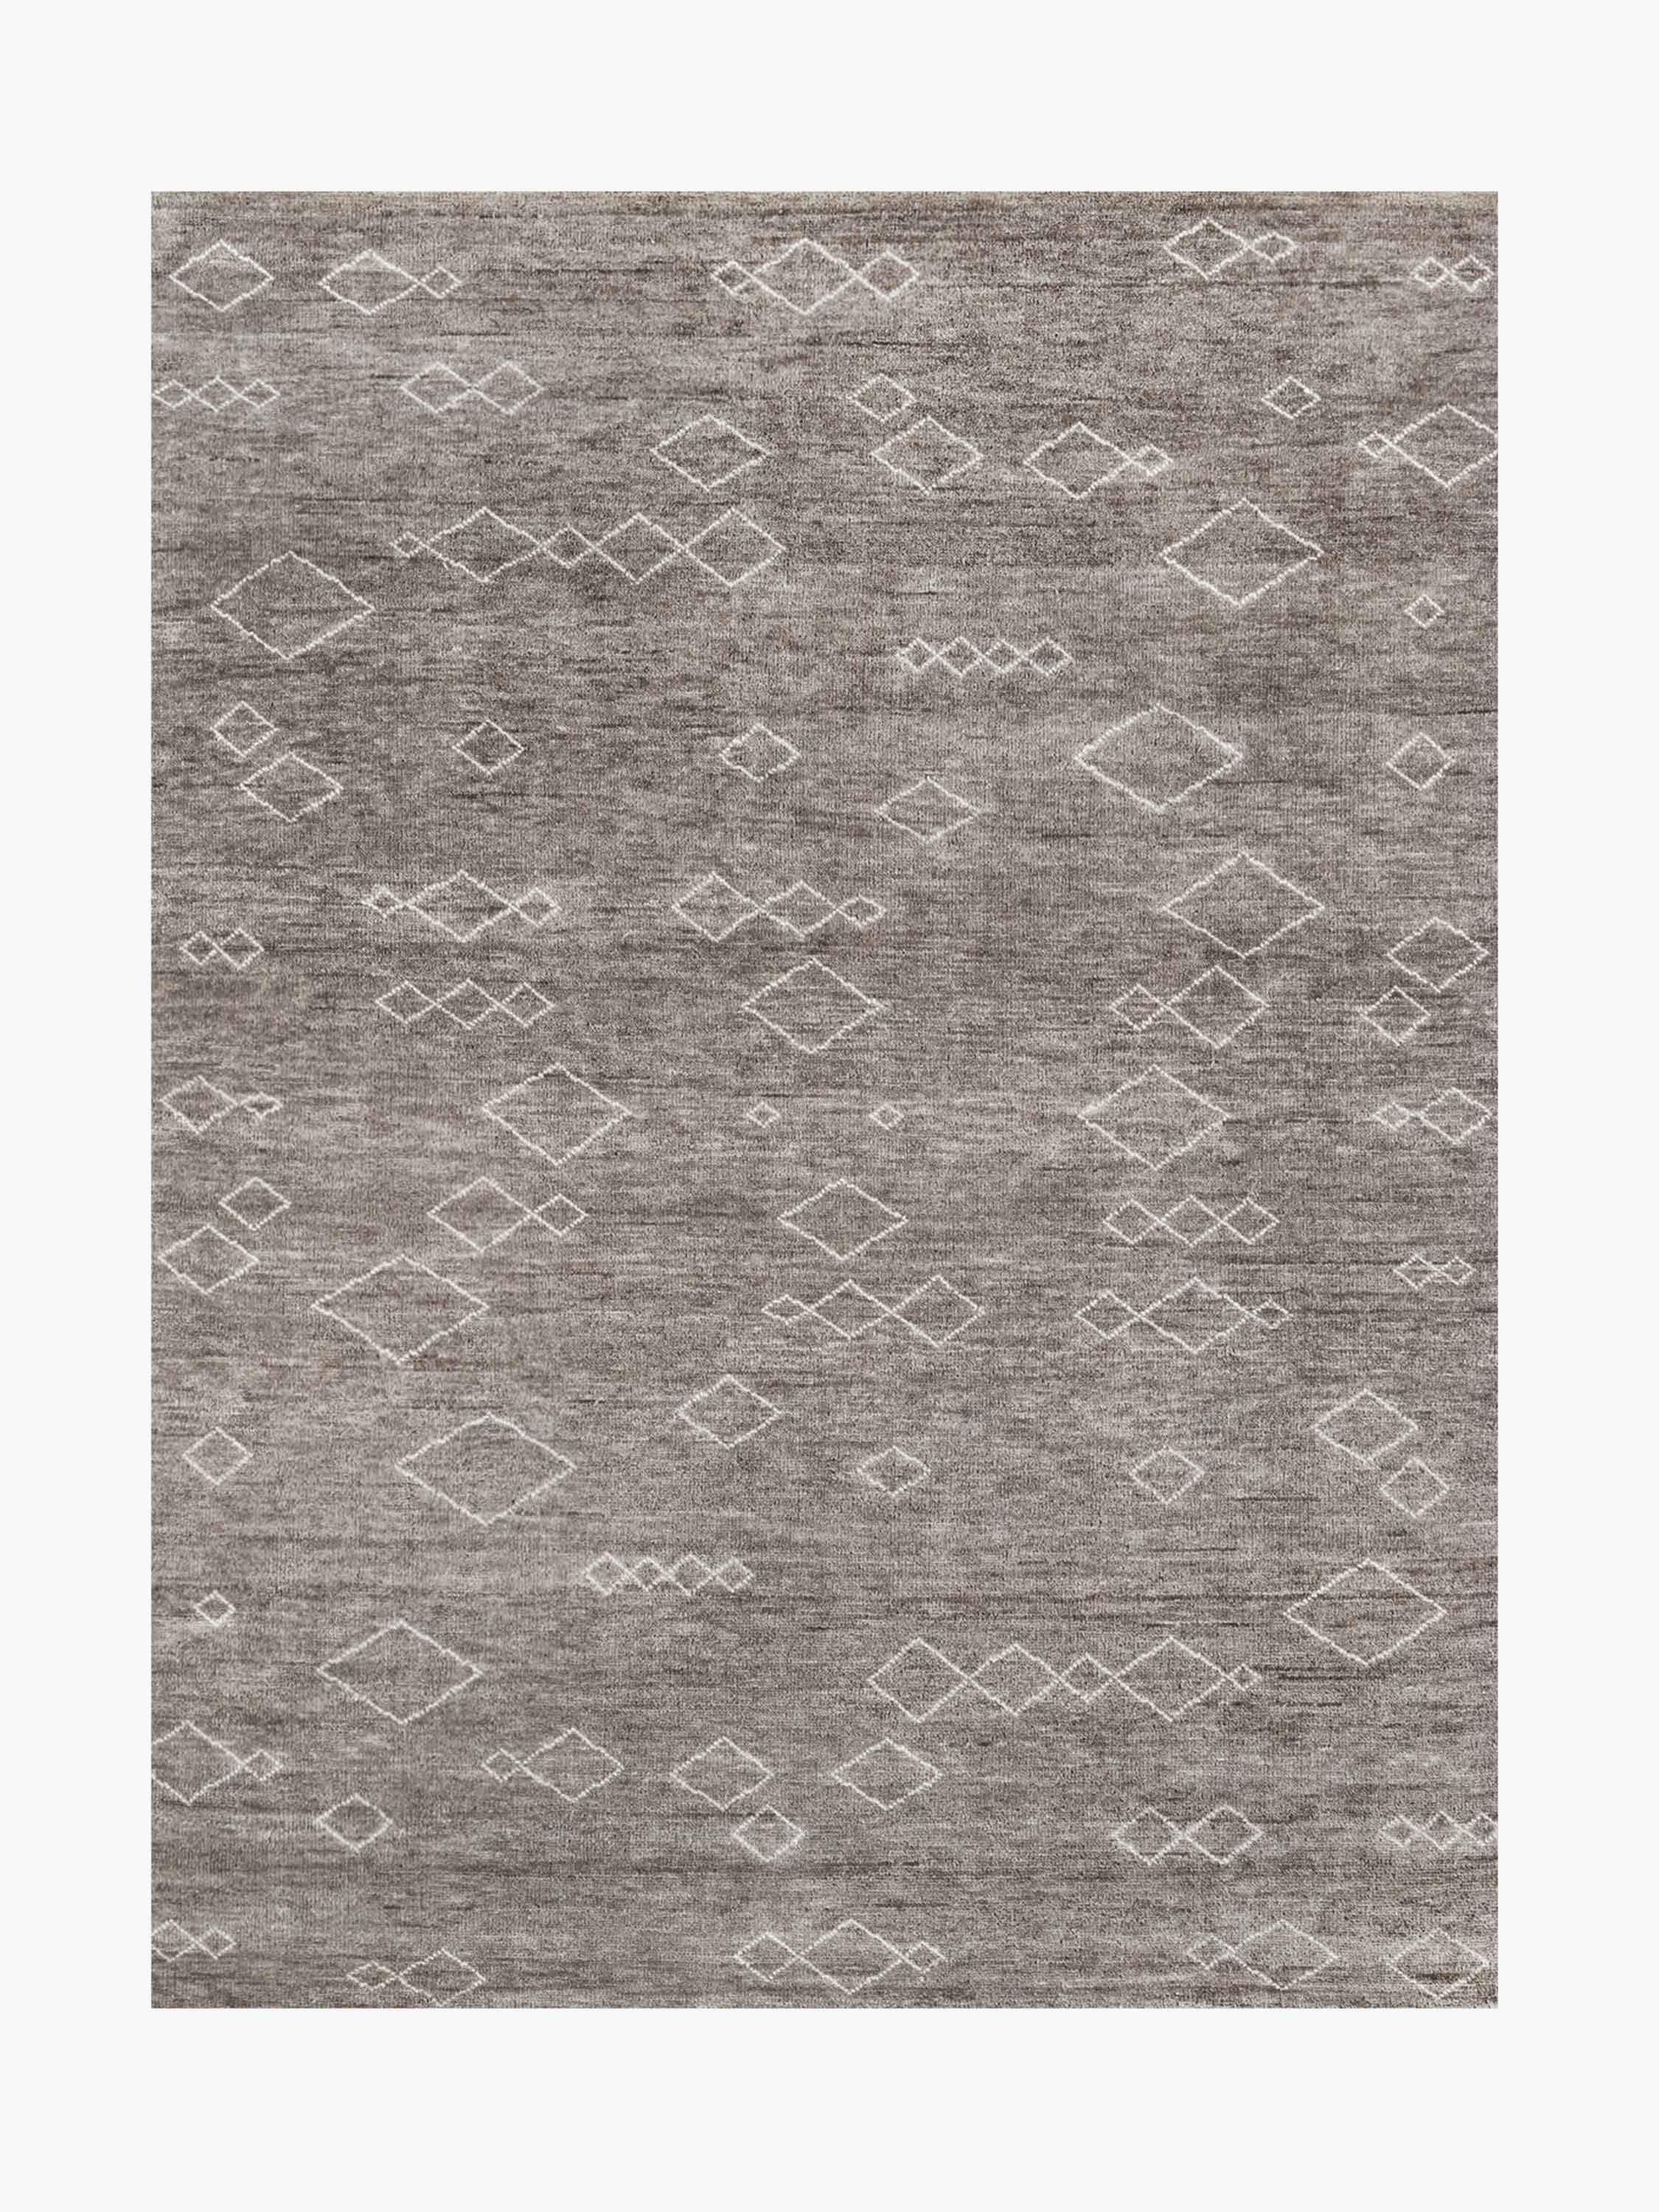 For Sale: Gray (Graphite/Sand) Ben Soleimani Arisa Rug– Moroccan Hand-knotted Plush Wool Carbon/Mist 12'x15'